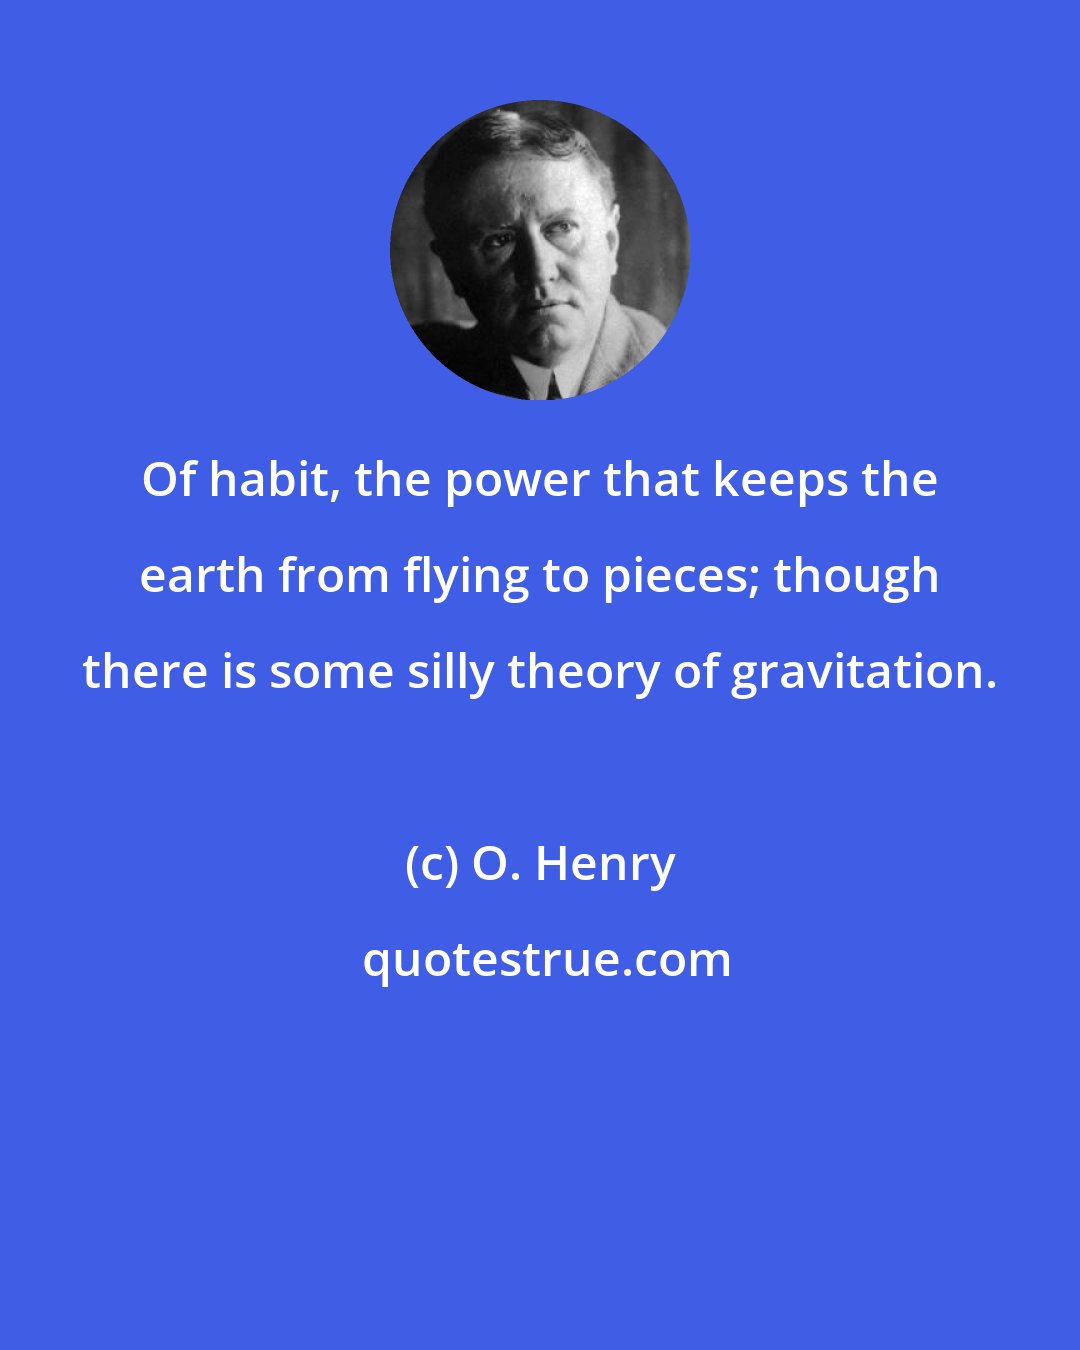 O. Henry: Of habit, the power that keeps the earth from flying to pieces; though there is some silly theory of gravitation.